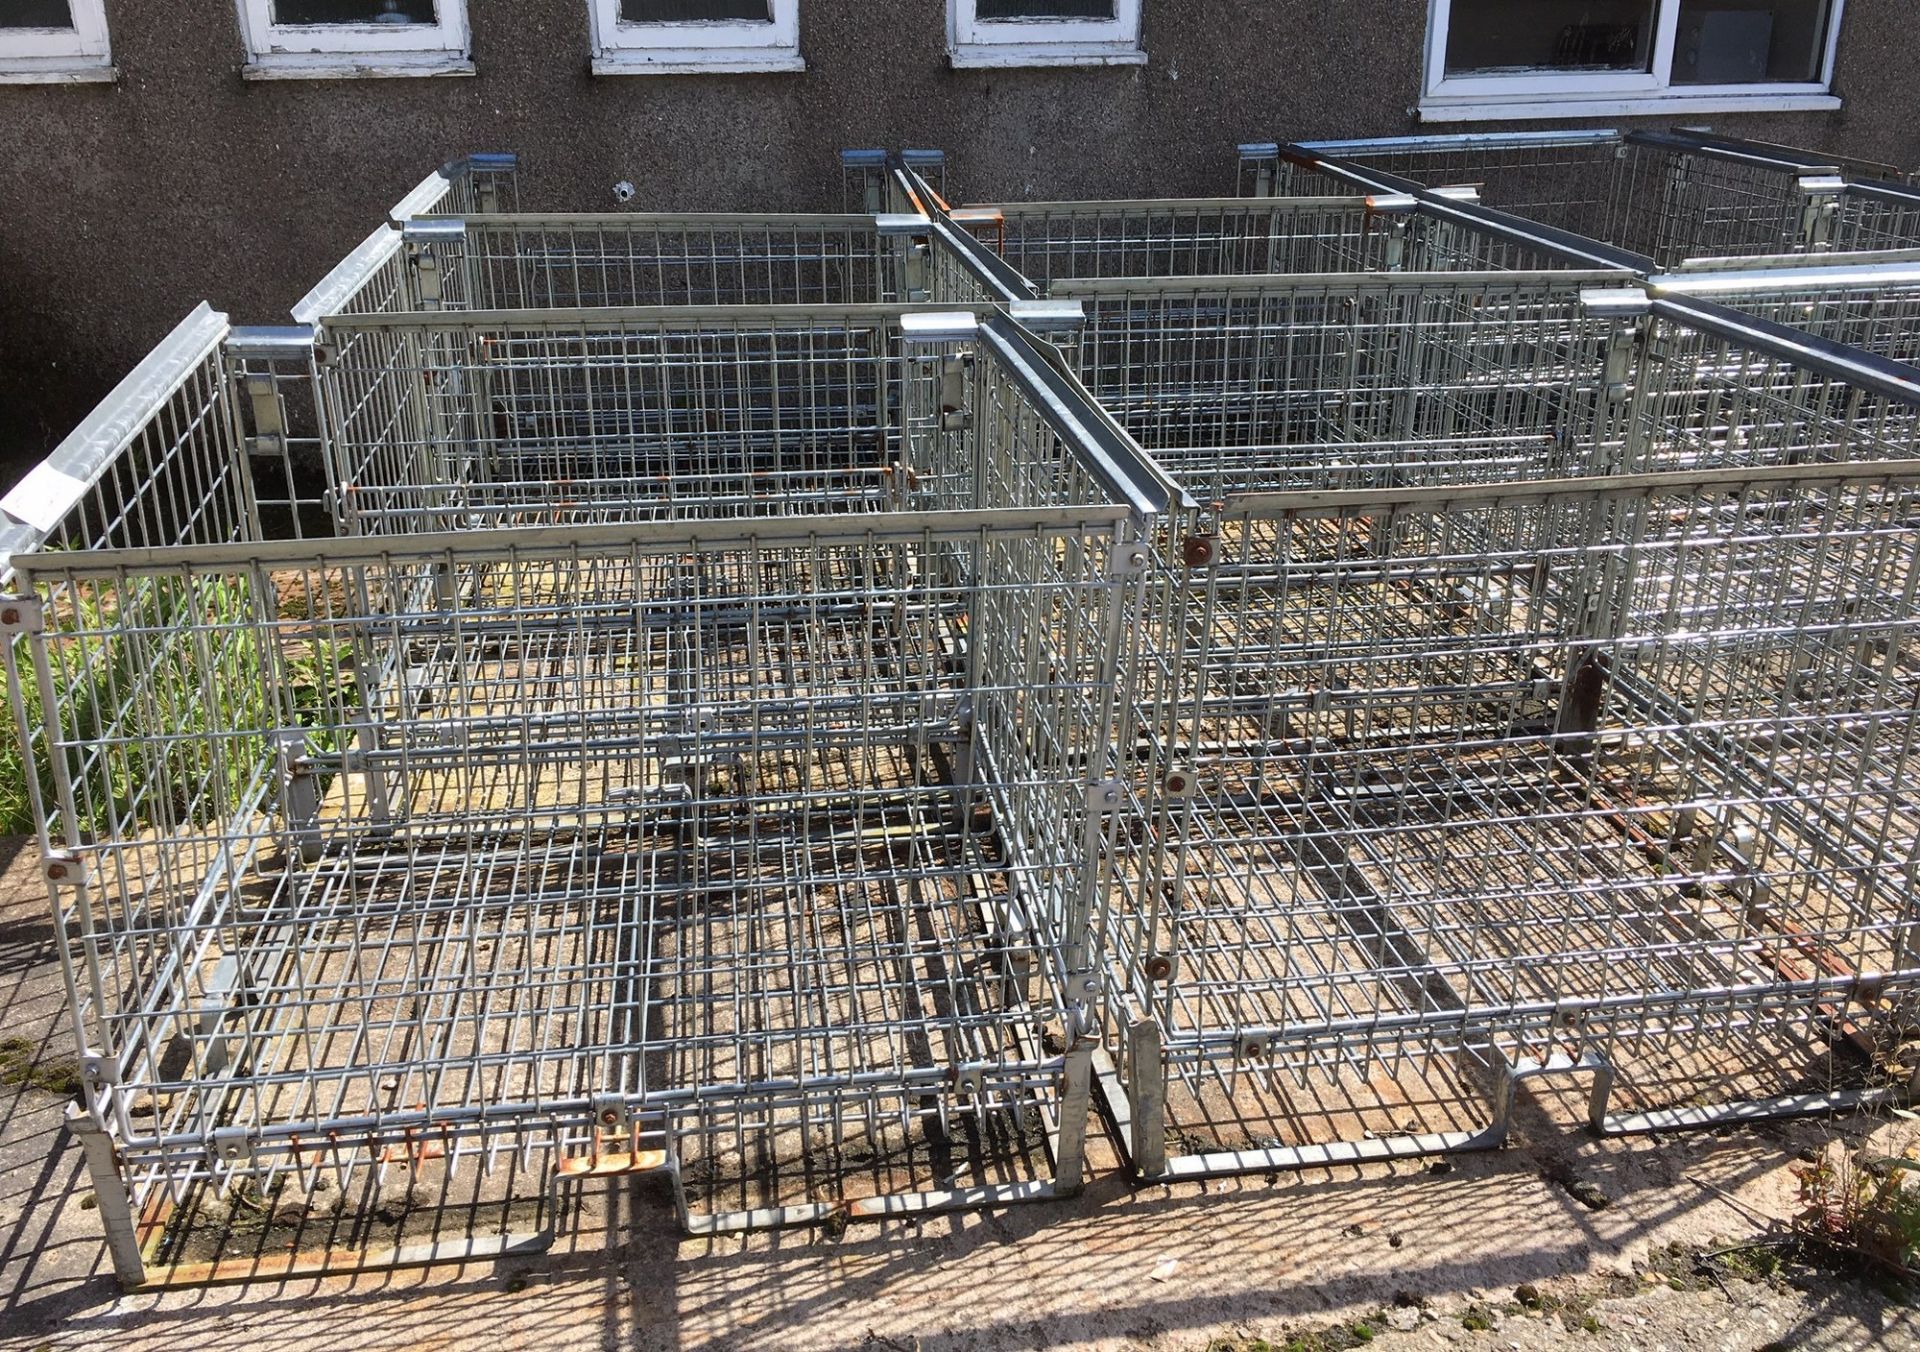 Lot of 6 Steel Cages.